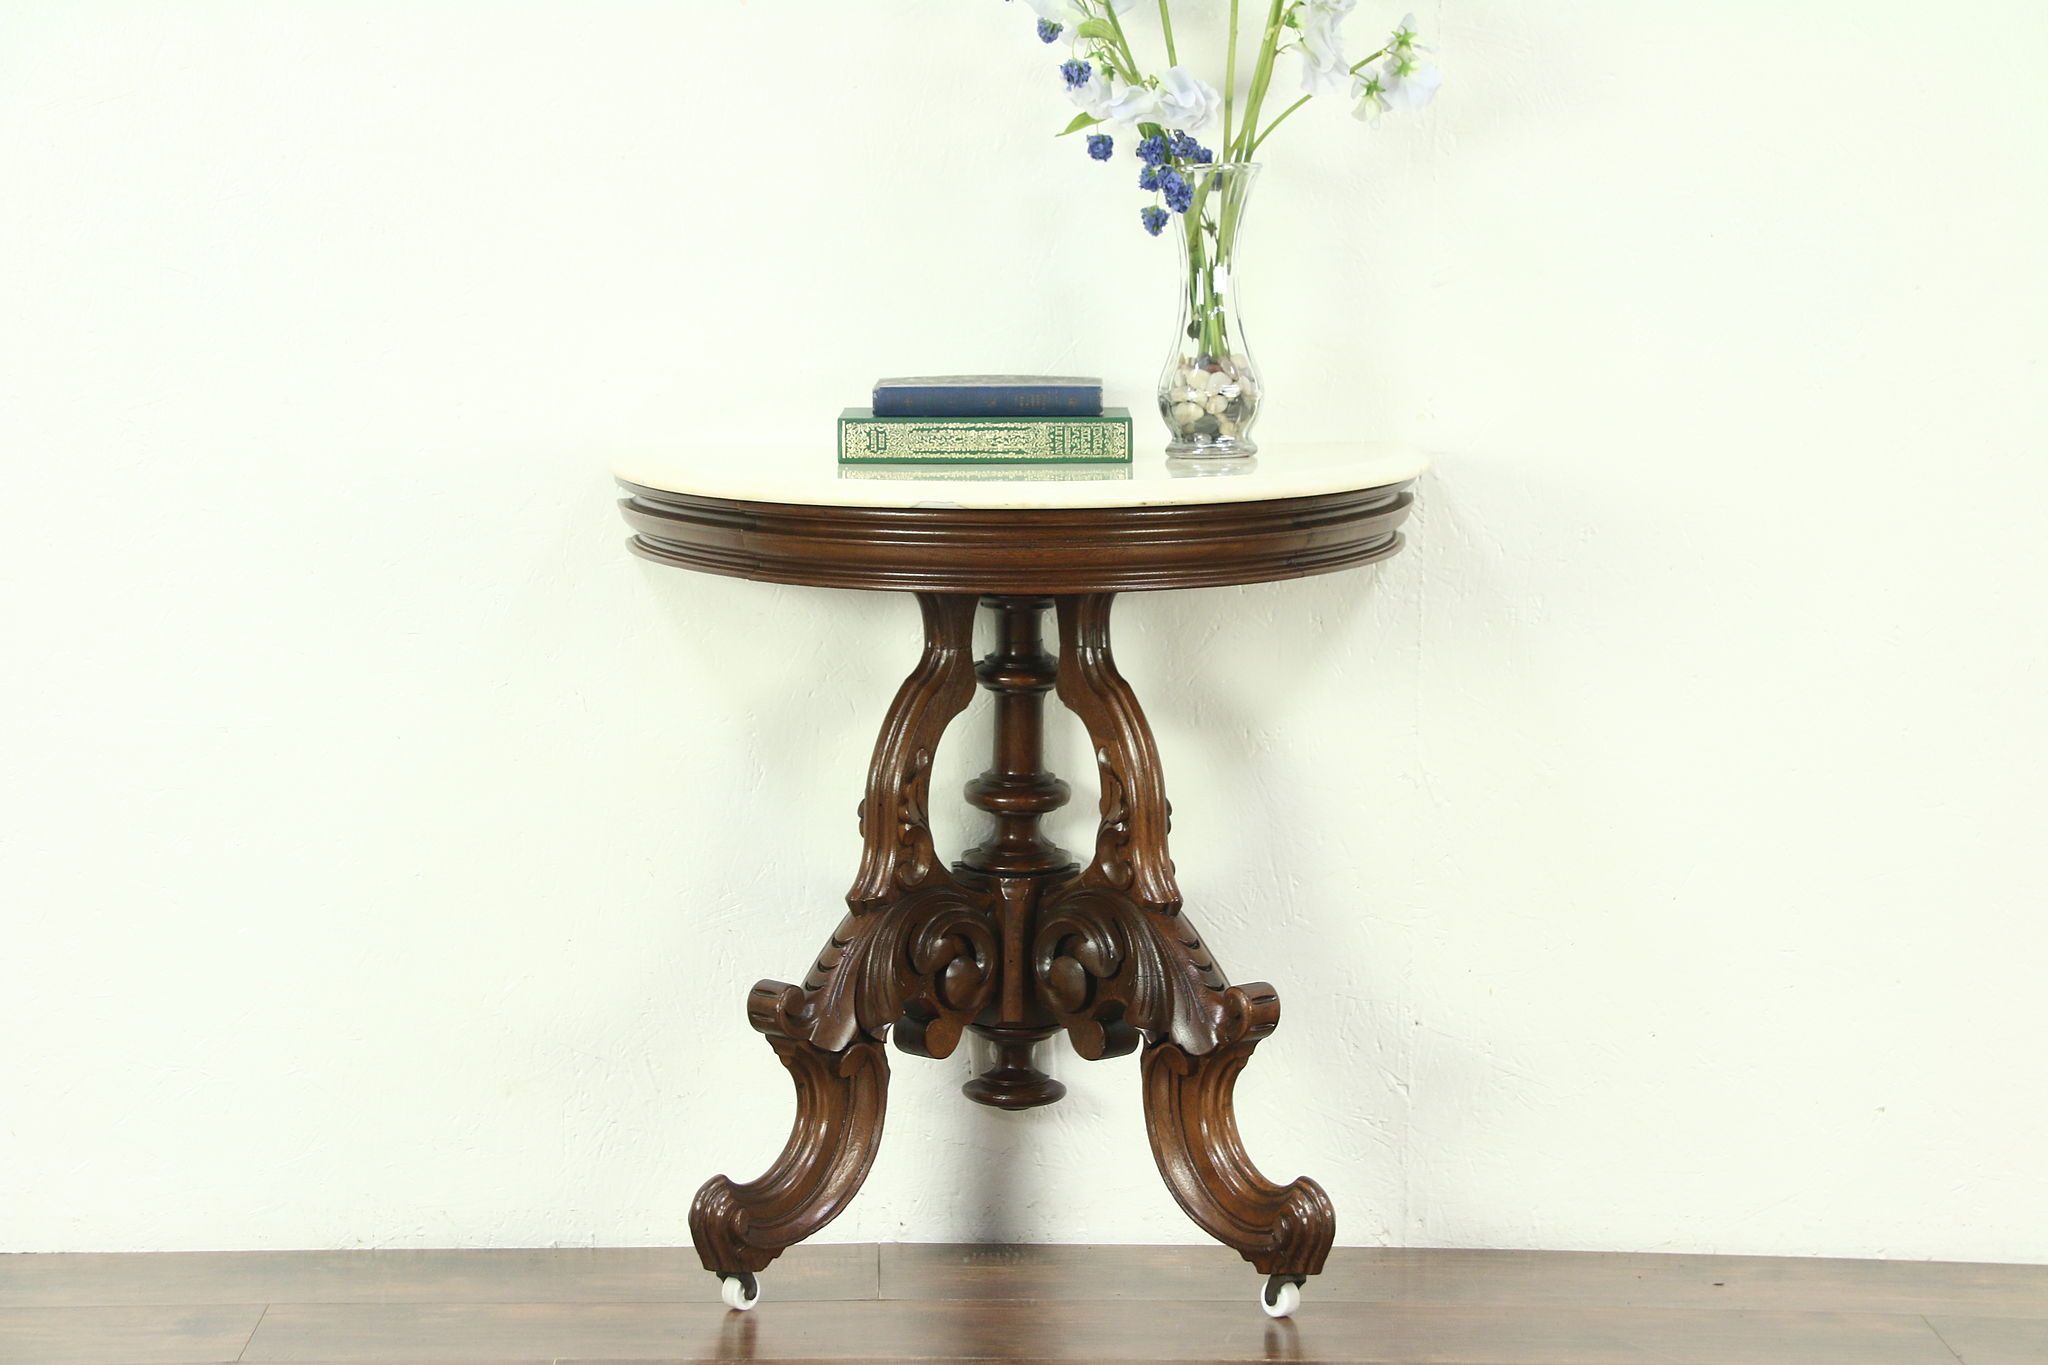 Sold – Victorian 1860 Antique Half Round Demilune Hall Console Table Intended For Round Console Tables (View 2 of 20)